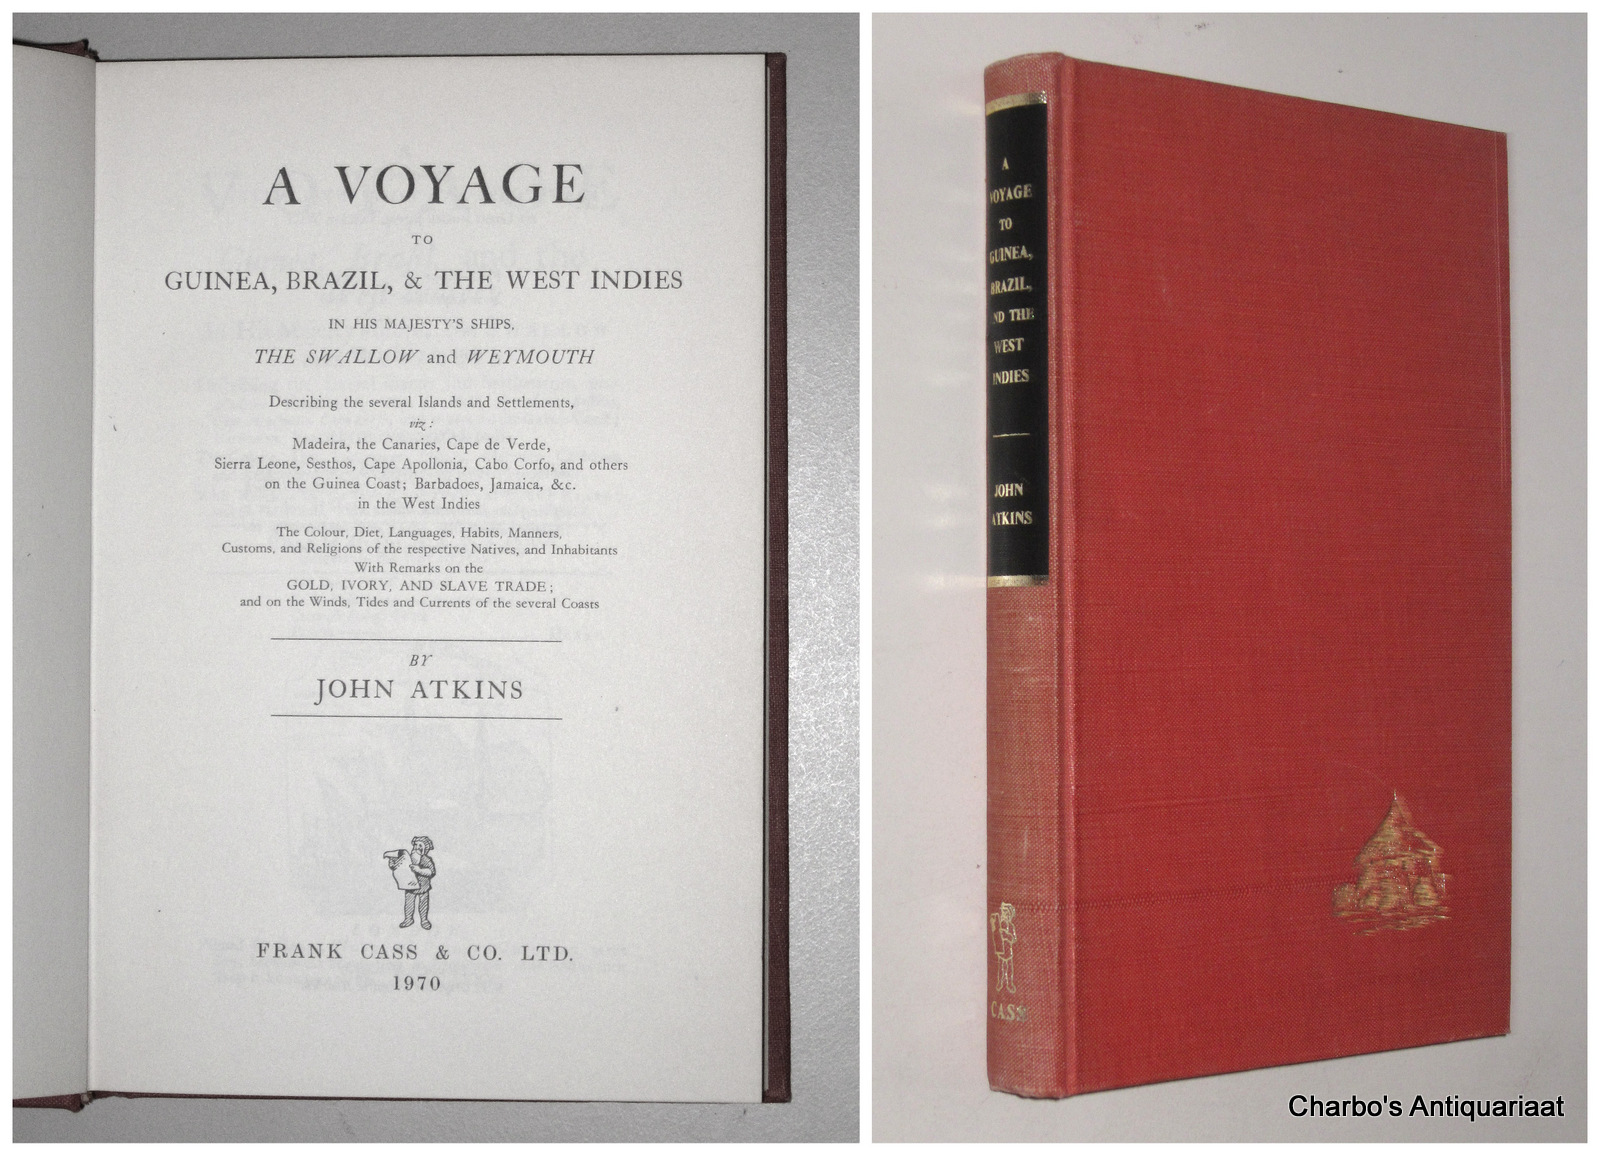 ATKINS, JOHN, -  A voyage to Guinea, Brazil, & the West Indies; in His Majesty's ships the Swallow and Weymouth. Describing the several islands and settlements, viz: Madeira, the Canaries, Cape de Verde, Sierra Leone, Sesthos, Cape Apollonia, Cabo Corfo, and others on the Guinea Coast; Barbadoes, Jamaica, &c. in the West Indies.... With remarks on the gold, ivory, and slave trade.